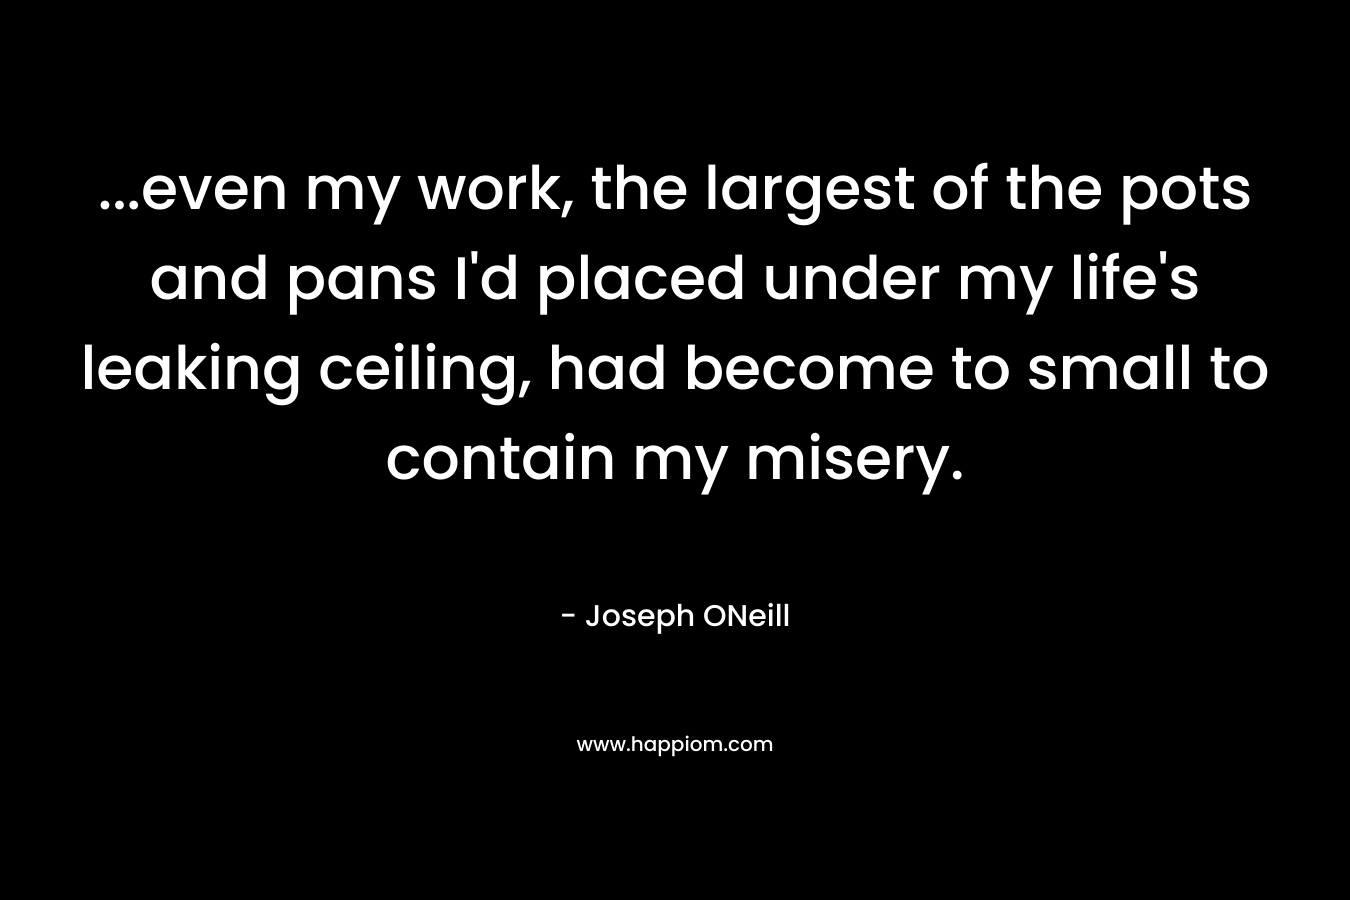 …even my work, the largest of the pots and pans I’d placed under my life’s leaking ceiling, had become to small to contain my misery. – Joseph ONeill